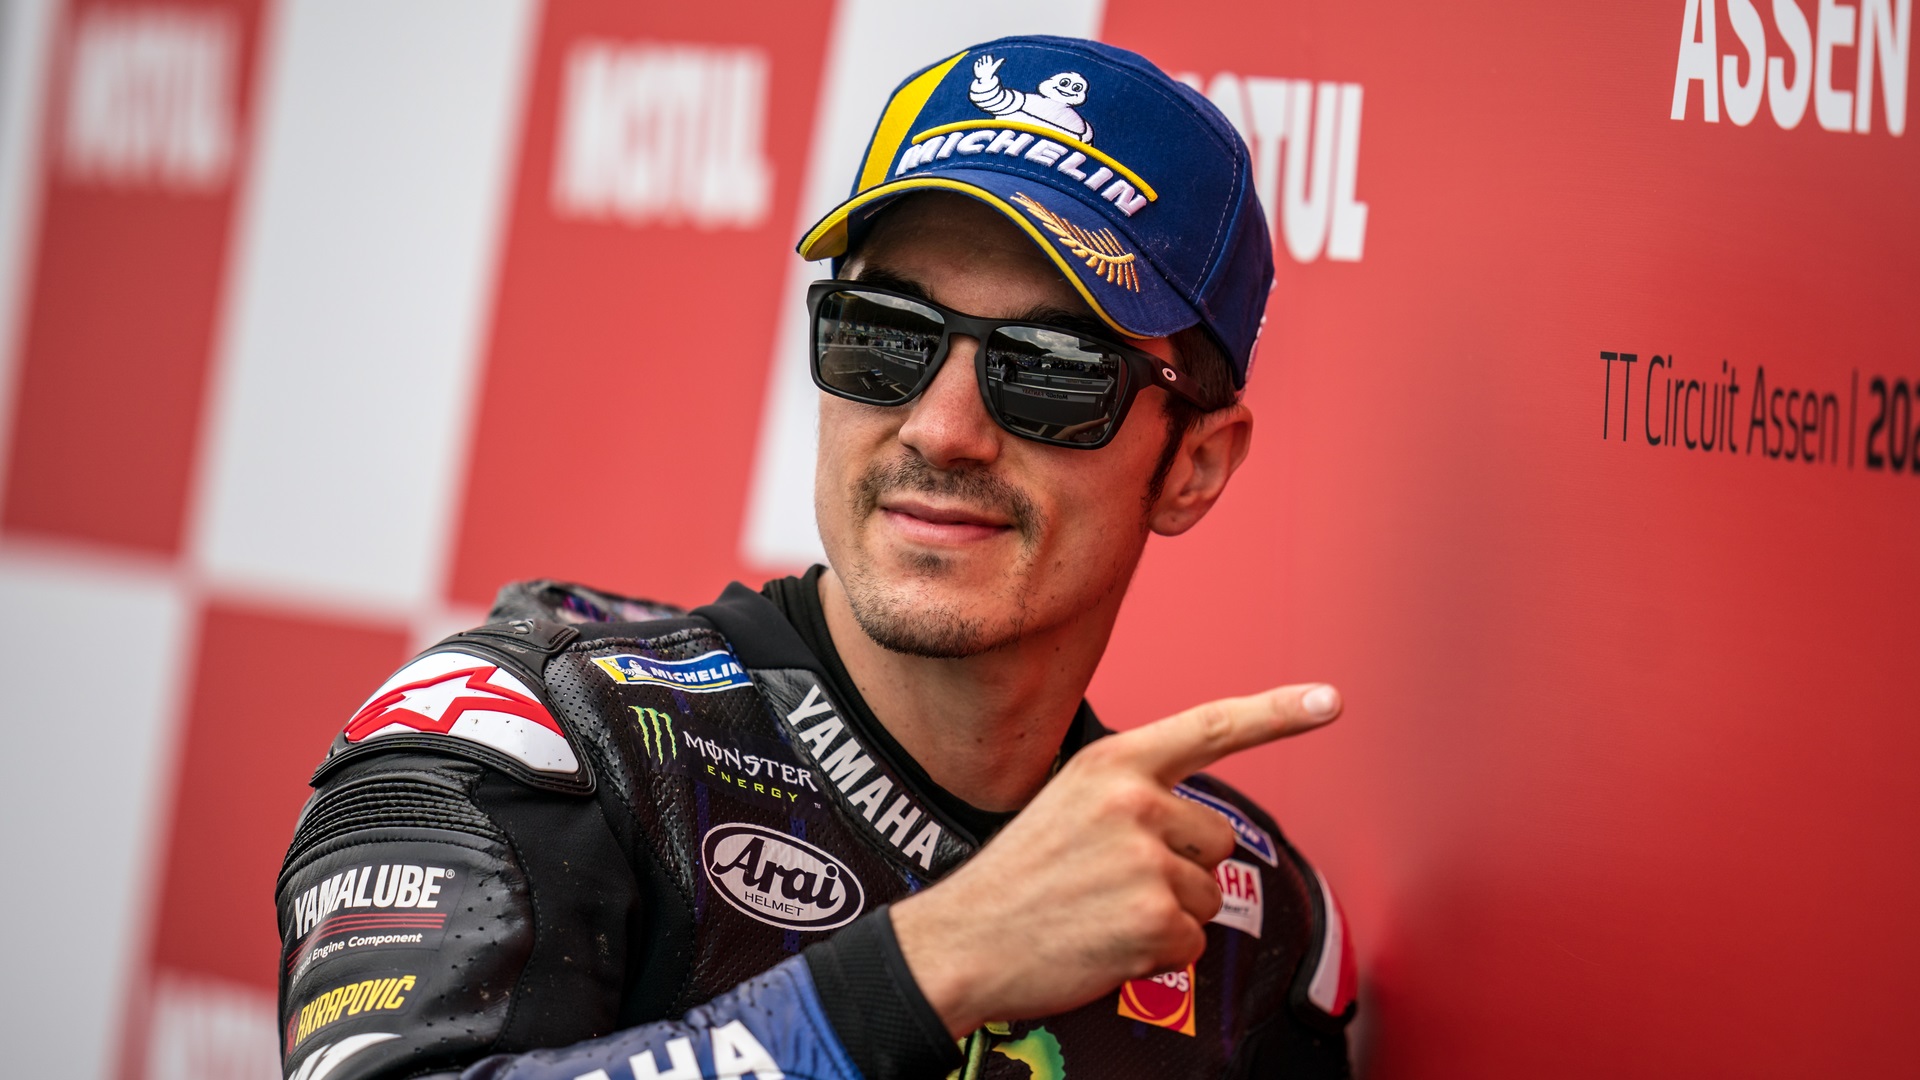 Maverick Vinales failed to finish last week's Styrian Grand Prix and has now been withdrawn from the upcoming Austrian Grand Prix.